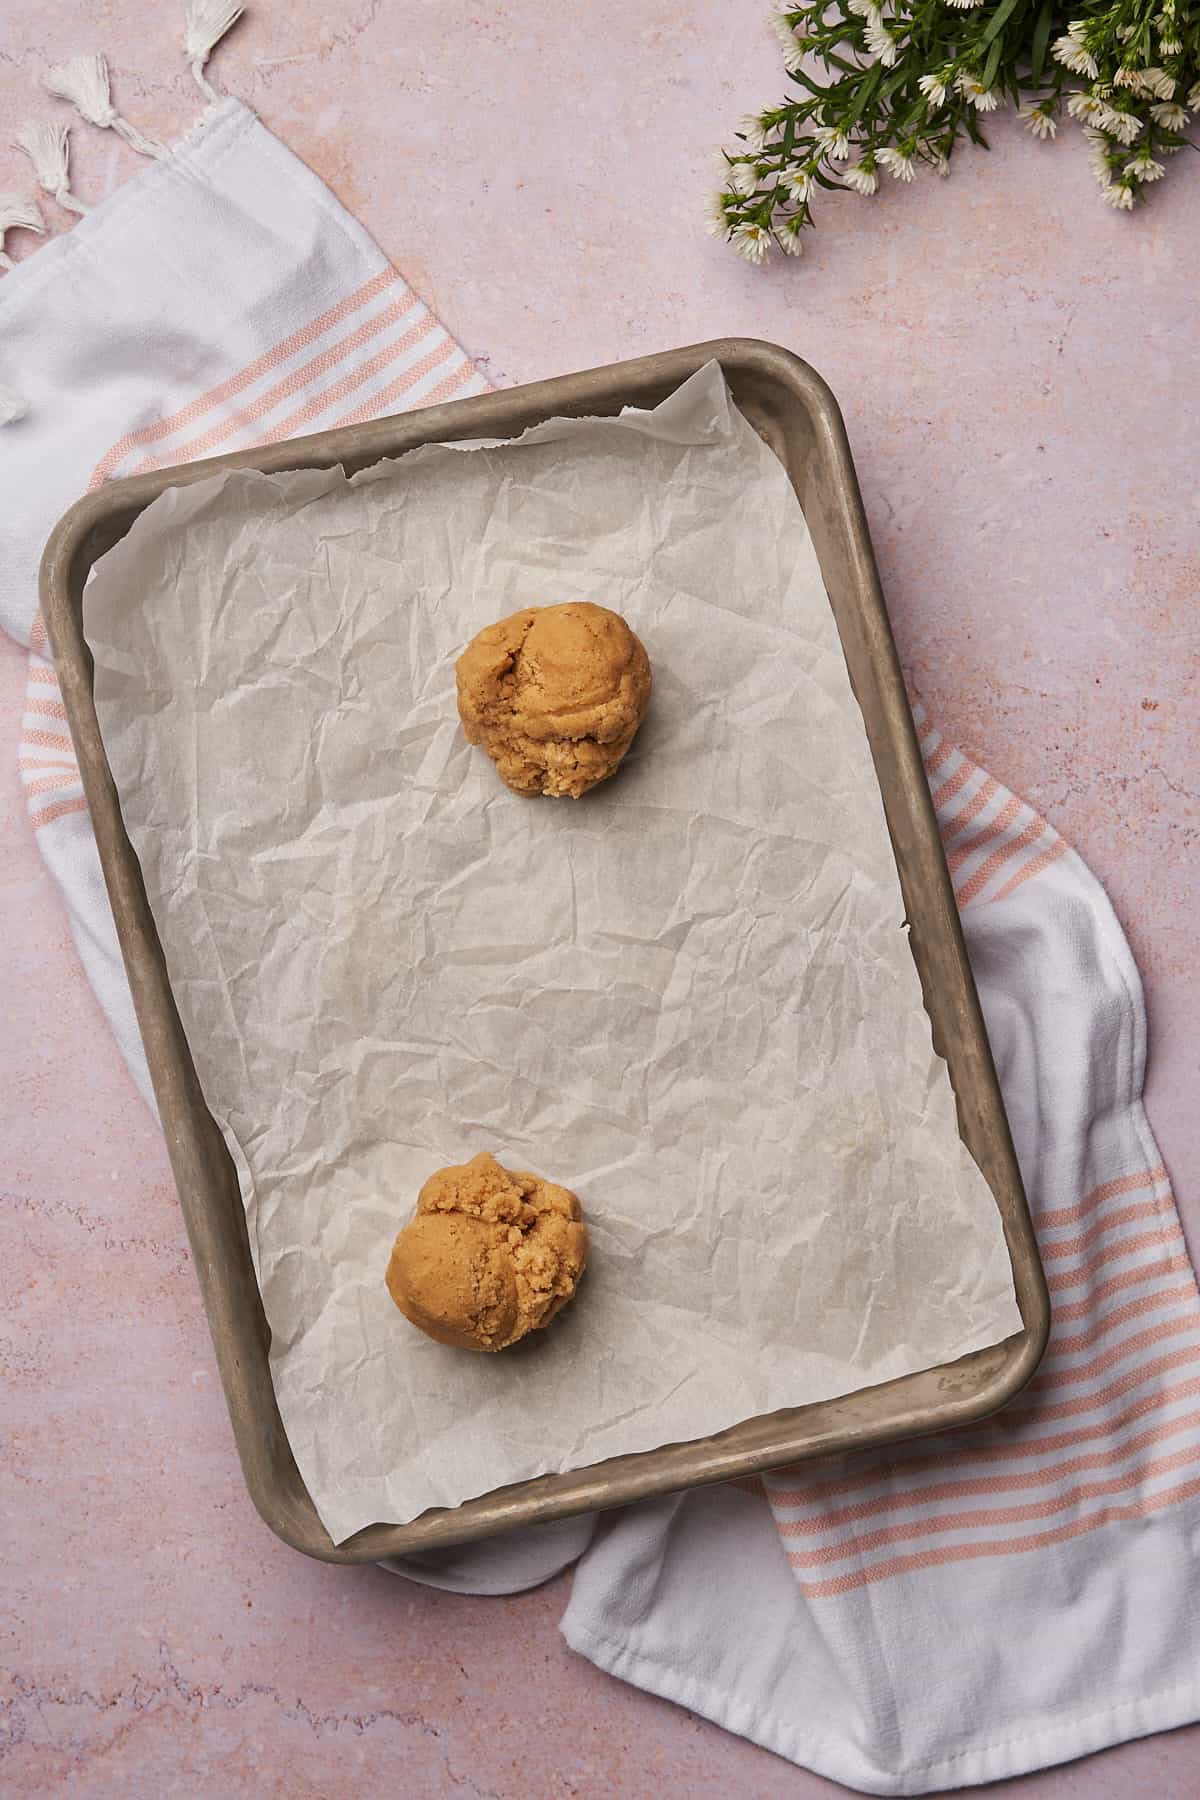 2 large balls of cookie dough on a parchment lined baking sheet. 